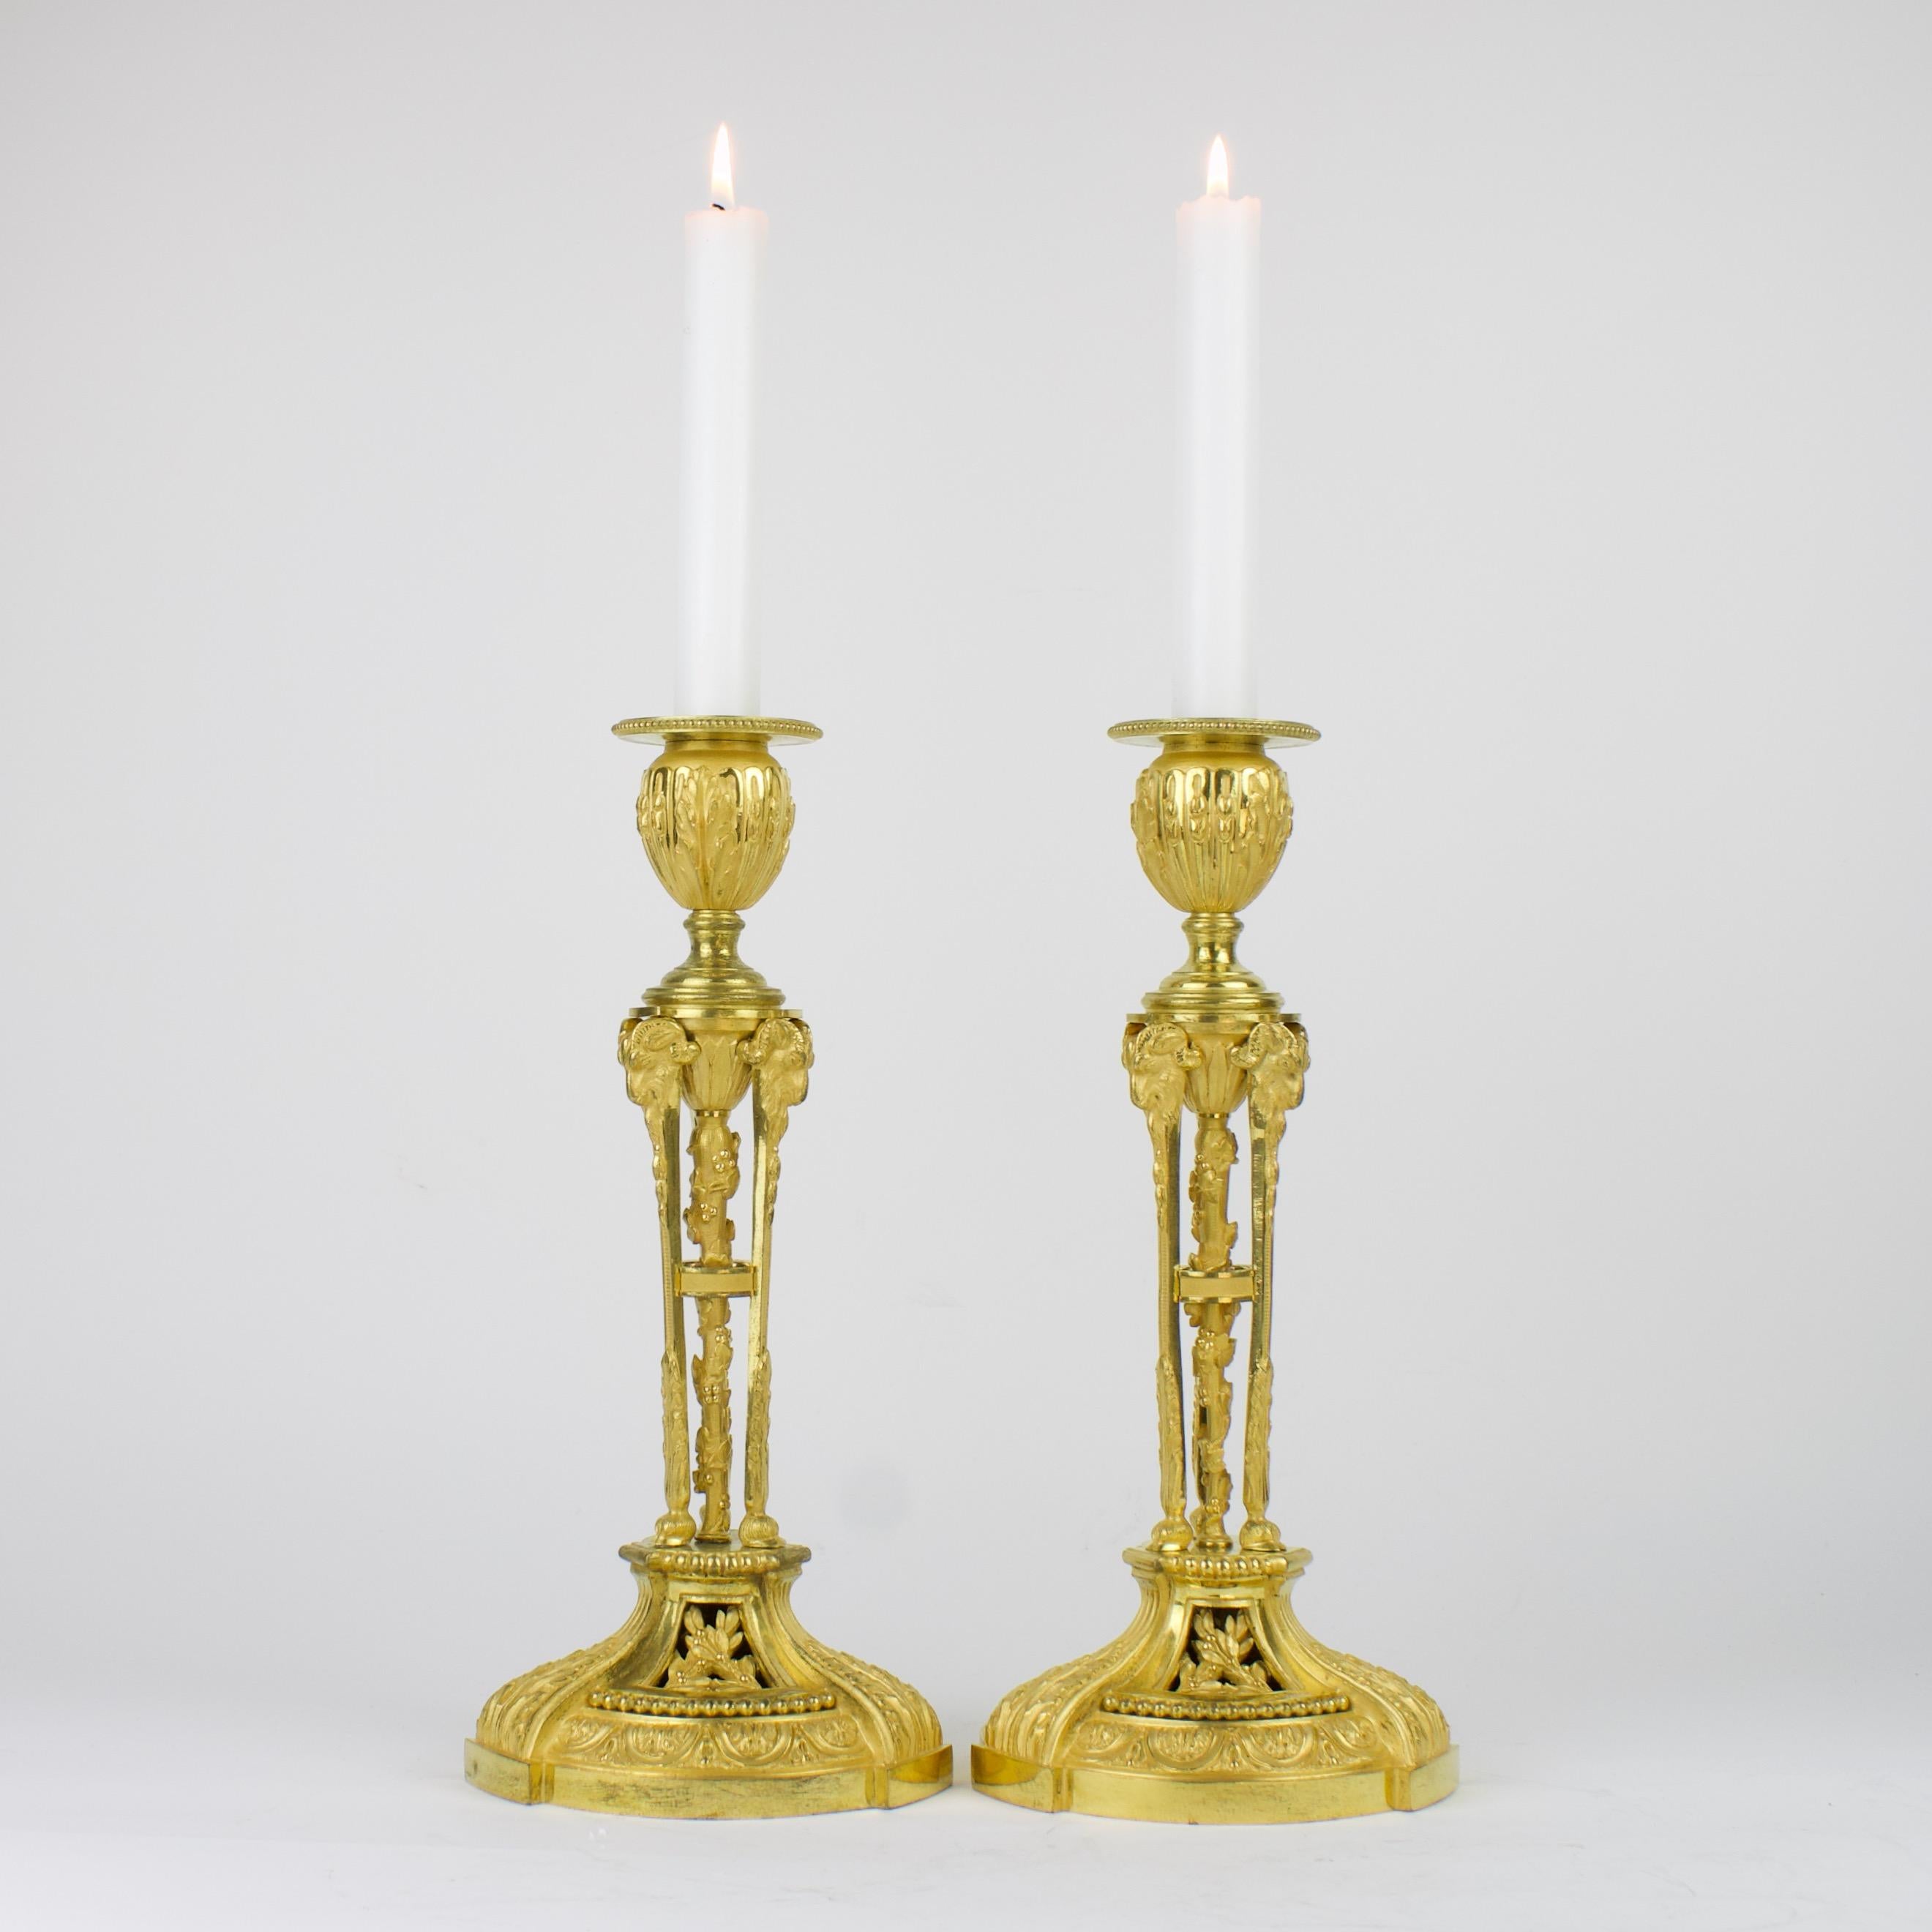 Excellent pair of Louis XVI gilt bronze candlesticks after a model by Etienne Martincourt (master 1762, died after 1791): 
Candelstick shaft à l'Athénienne consisting of three caryatids with rams' heads and hooves standing on a domed circular base